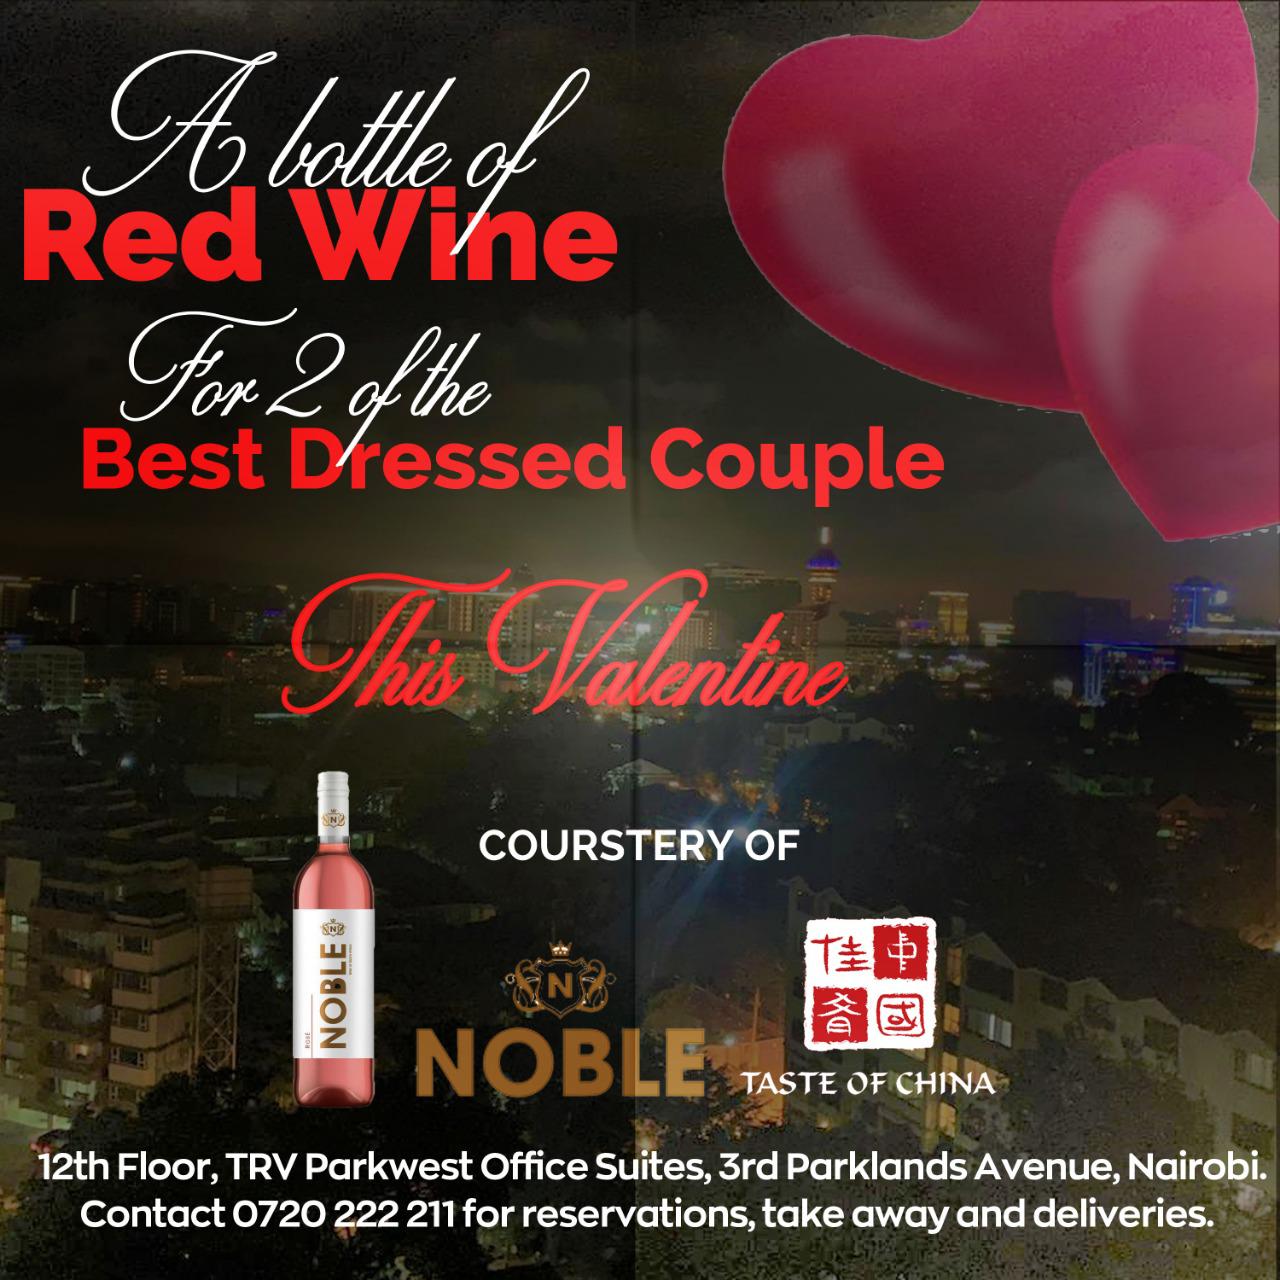 Experience Valentine's Dinner At Taste Of China- A Bottle Of Wine To The 2 Best Dressed Couples Of The Evening & A Special Gift To The First 100 Ladies